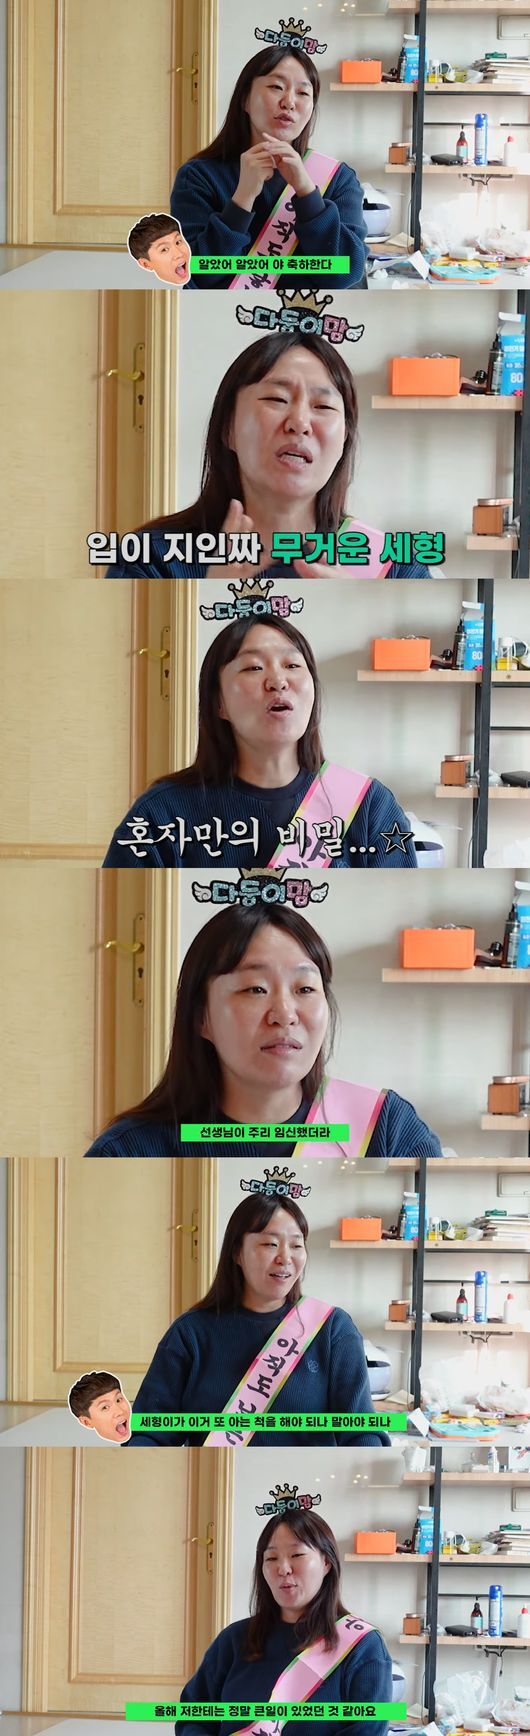 Jung Juri delivered fourth pregnancy behind-the-scenes Kahaani.On the 29th, Jung Juri went through his YouTube channel to pregnancy behind-the-scenes to Yang Se-hyeongs ssull!He posted the video and reported the pregnancy behind Kahaani.On this day, Jung Juri responded to the recent response that the house was too clean and disappointed, saying, I know how to deceive now. I put it everywhere.I just push it in these days, he laughed.Jung Juri then opened the door of the room saying, This is fun again. The room was full of hidden clutter and made the surroundings laugh.Jung Juri revealed another room, saying, I am good with a lot of laundry. However, unlike Jung Juris words, the room laughed again in a frenzy.I dont write stylists separately; stylist Sister got married and went to America, Jung Juri said.Jung Juri said, The size 55 of the clothes is the most easy to get.But I wanted to wear my clothes because I was feeling less and less because of the pregnancy. Jung Juri told the fourth pregnancy behind-the-scenes story: I did the test at my home, Husband was going to a convenience store and I bought one.Then I came out just two lines. I was tearful because I had various feelings. My father sighed and went out.Jung Juri said, I was crying and I got a call from Se-hyung. I talked to my English senior and said that I called because I thought of it.So, I first knew him. I did not go to the hospital, so I asked him to keep it secret. Jung Juri said, The mouth is really heavy. From the moment of the test, the boat came out, so everyone noticed.So I talked to the people around me, but only the three were keeping secrets. Jung Juri then laughed, saying, I met my brother-in-law and asked if I should keep a secret. I told him that I could talk because I got a story.